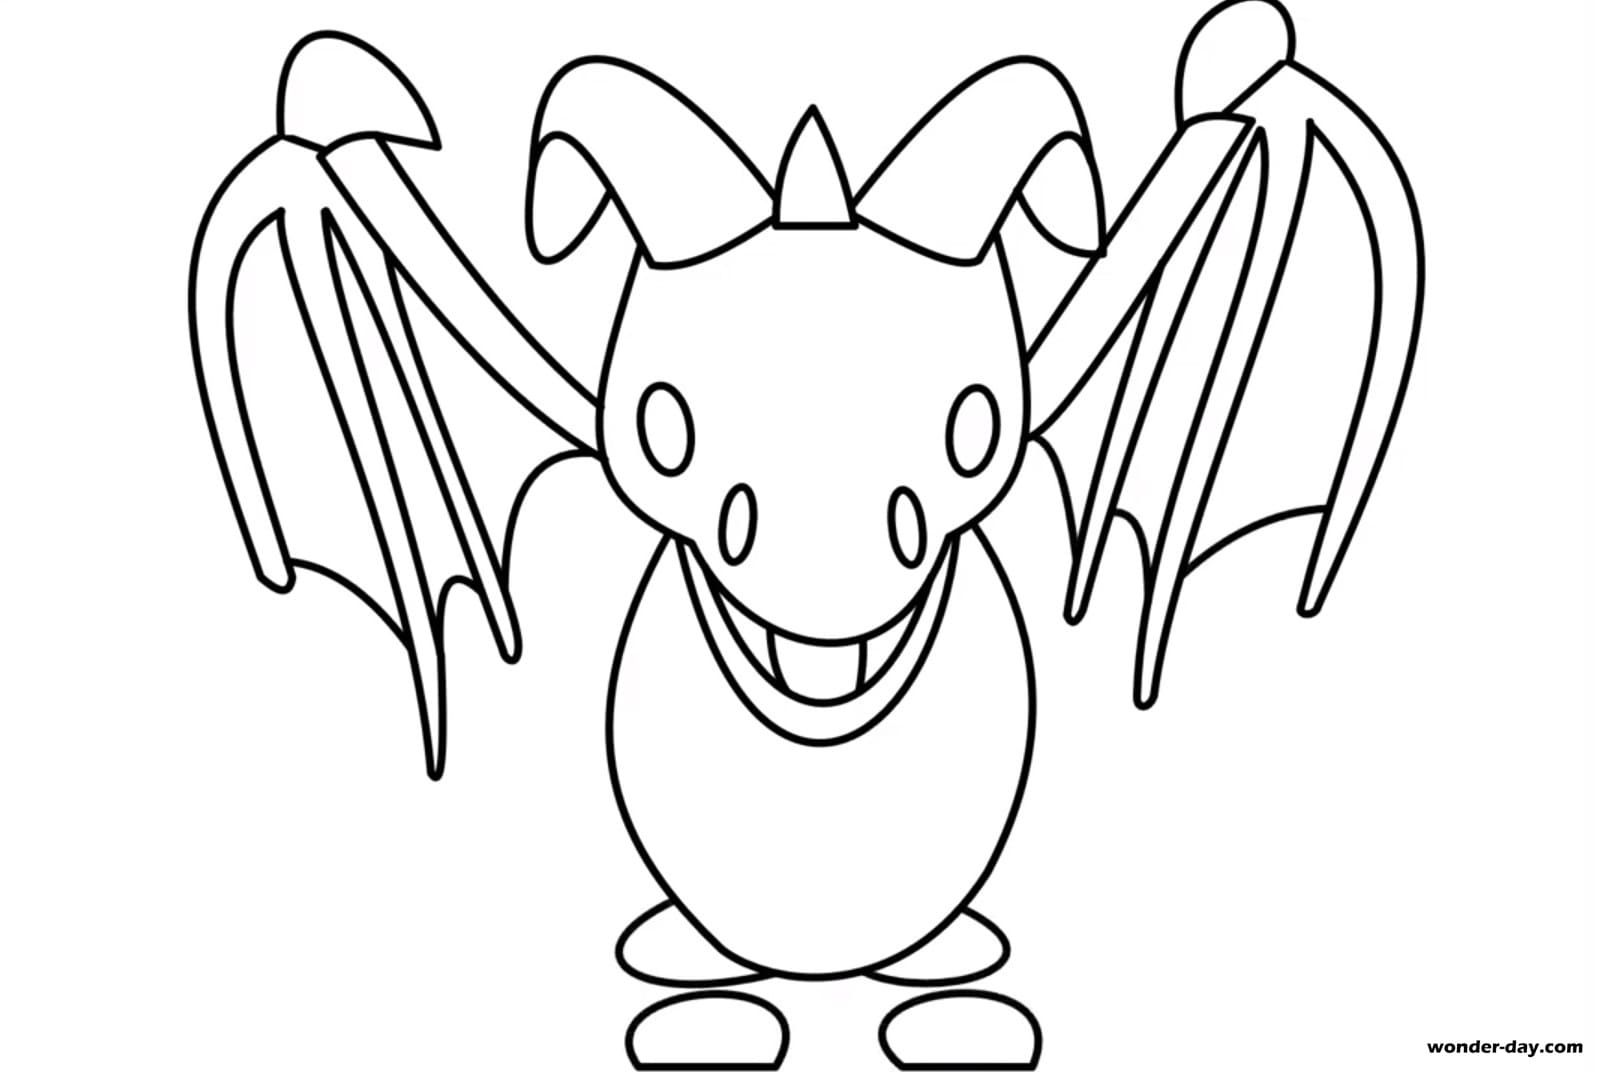 Adopt Me Coloring Page Pig